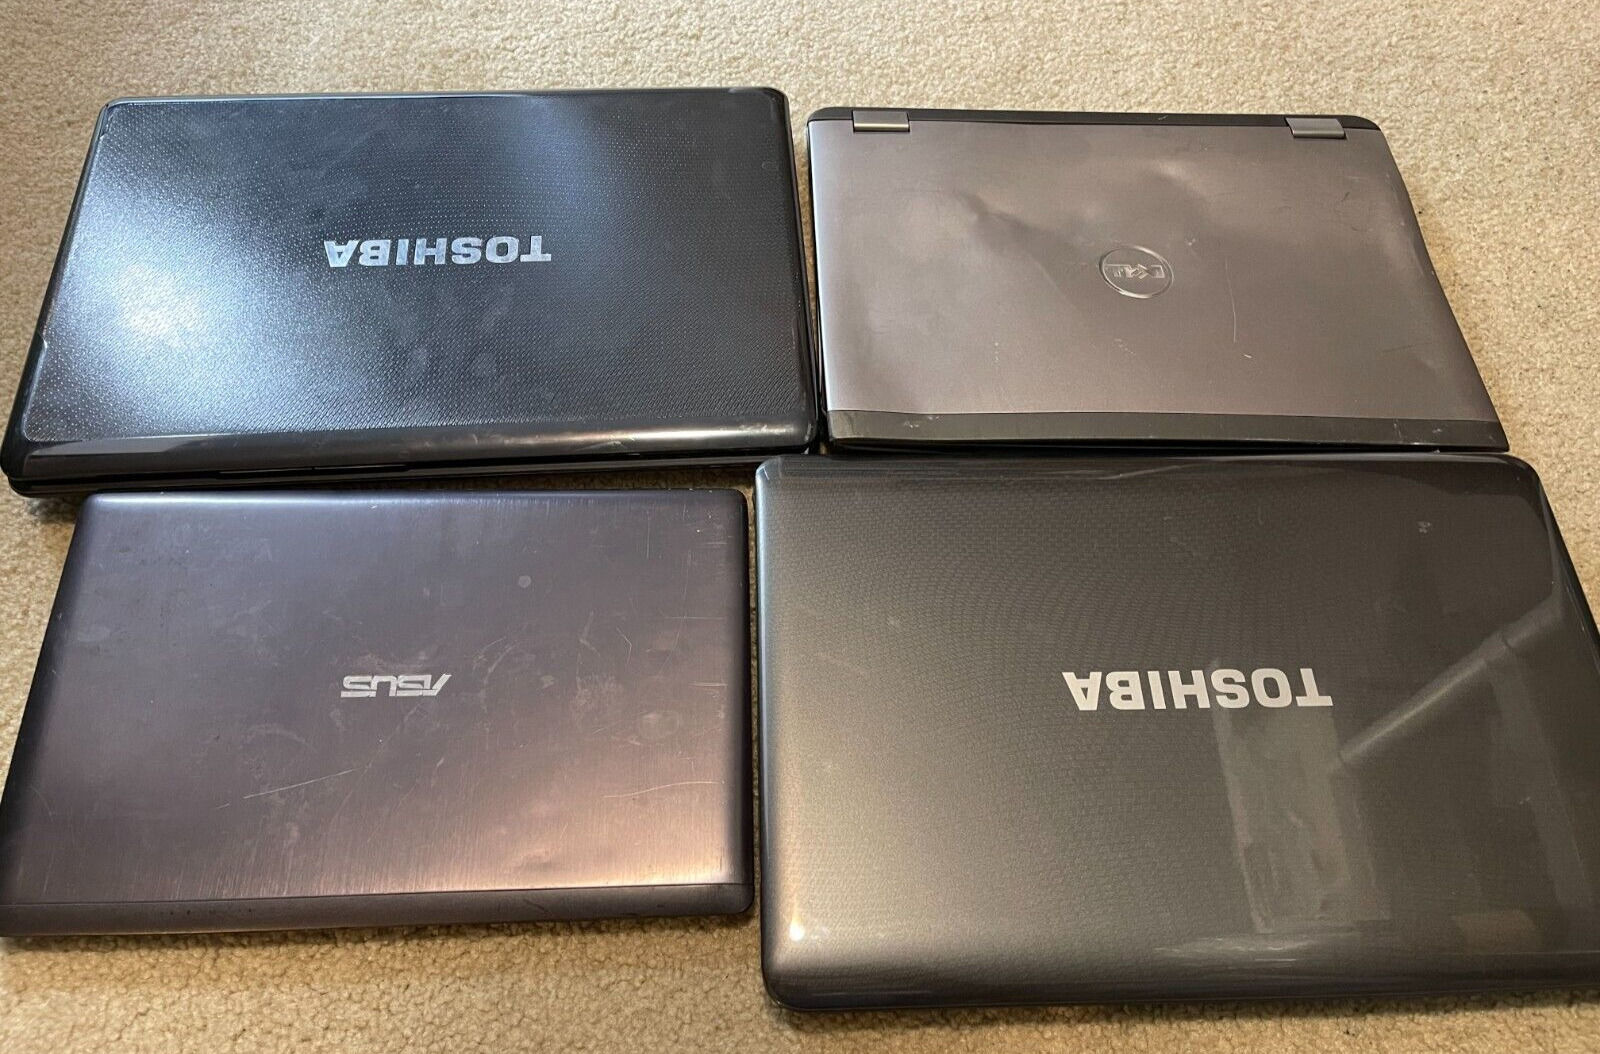 Lot of 4 laptops - Untested As Is